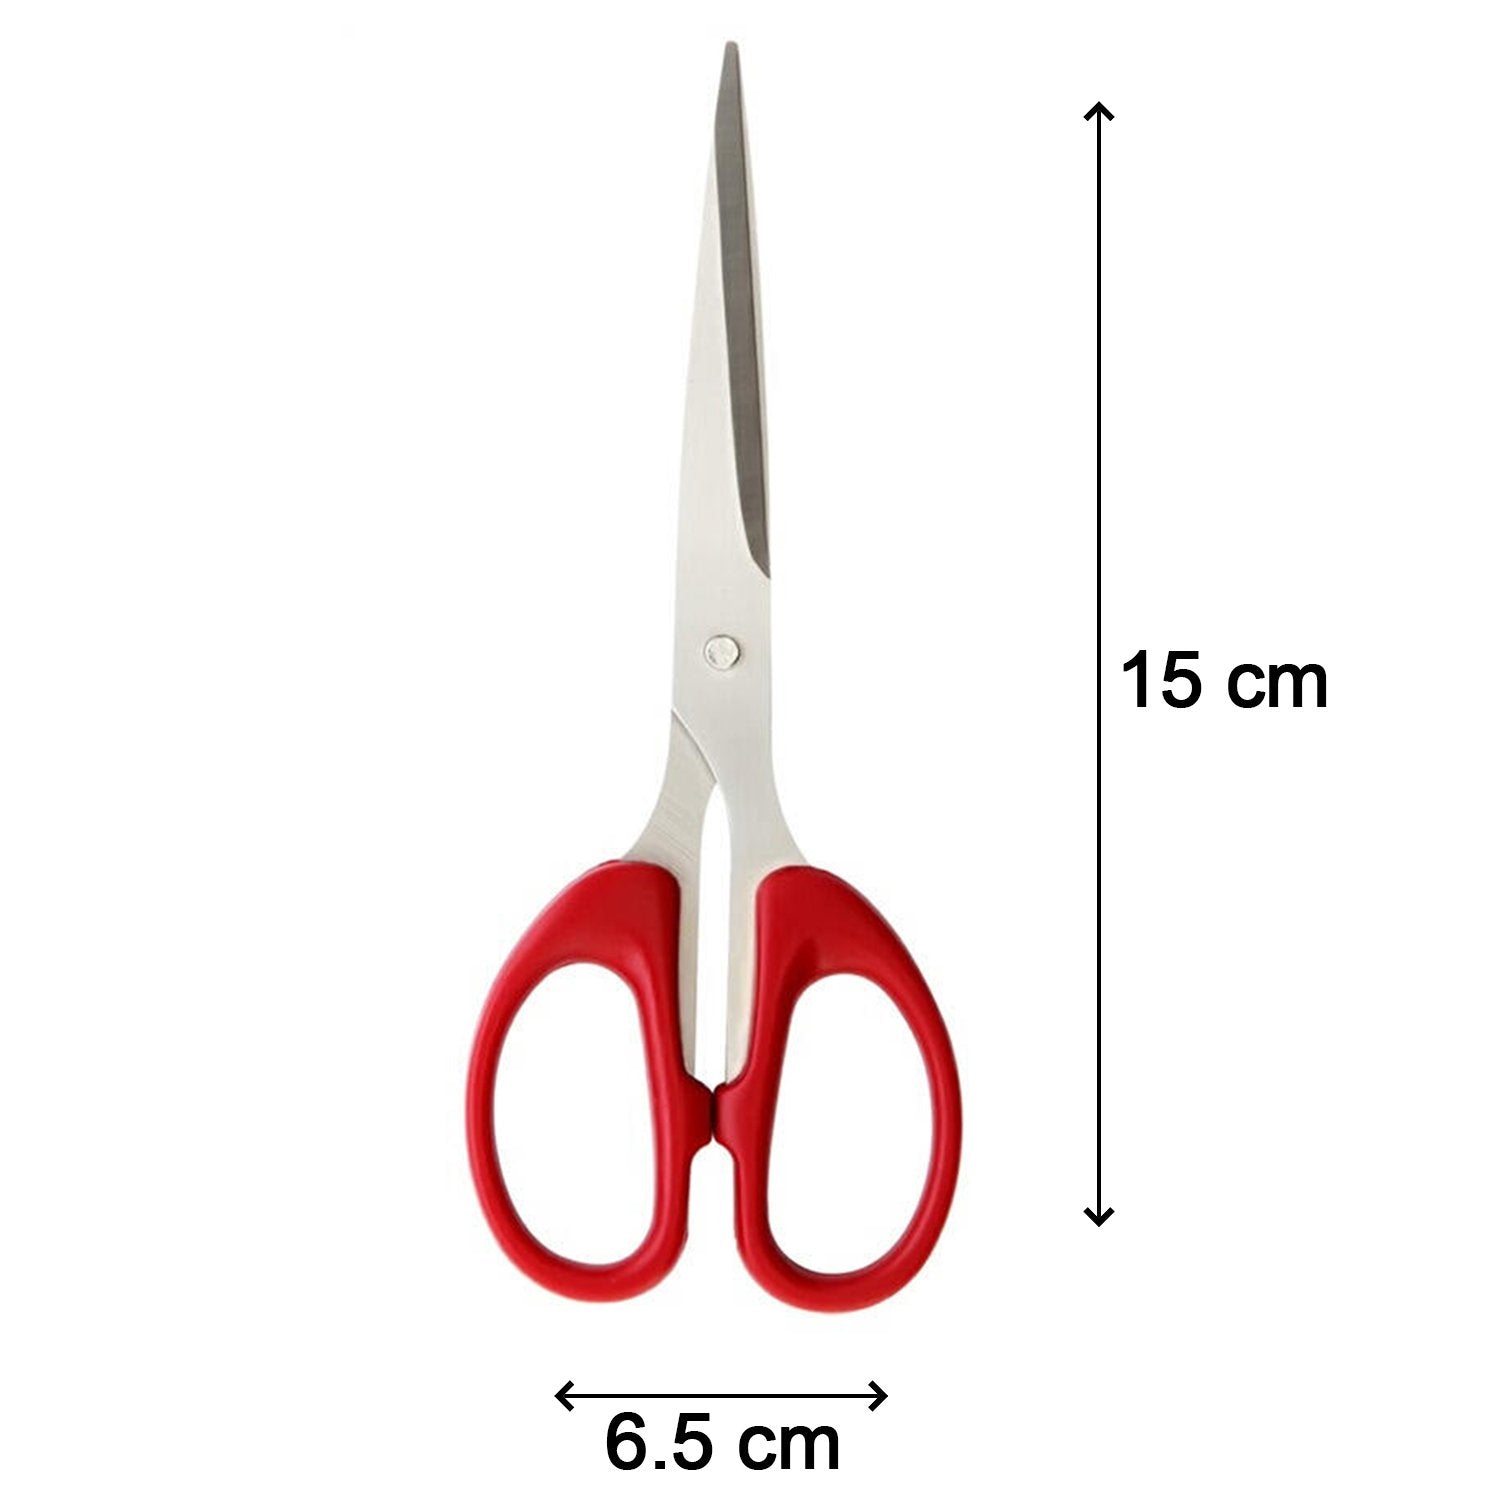 1800 Stainless Steel Scissors with Plastic handle grip 160mm (1Pc Only)